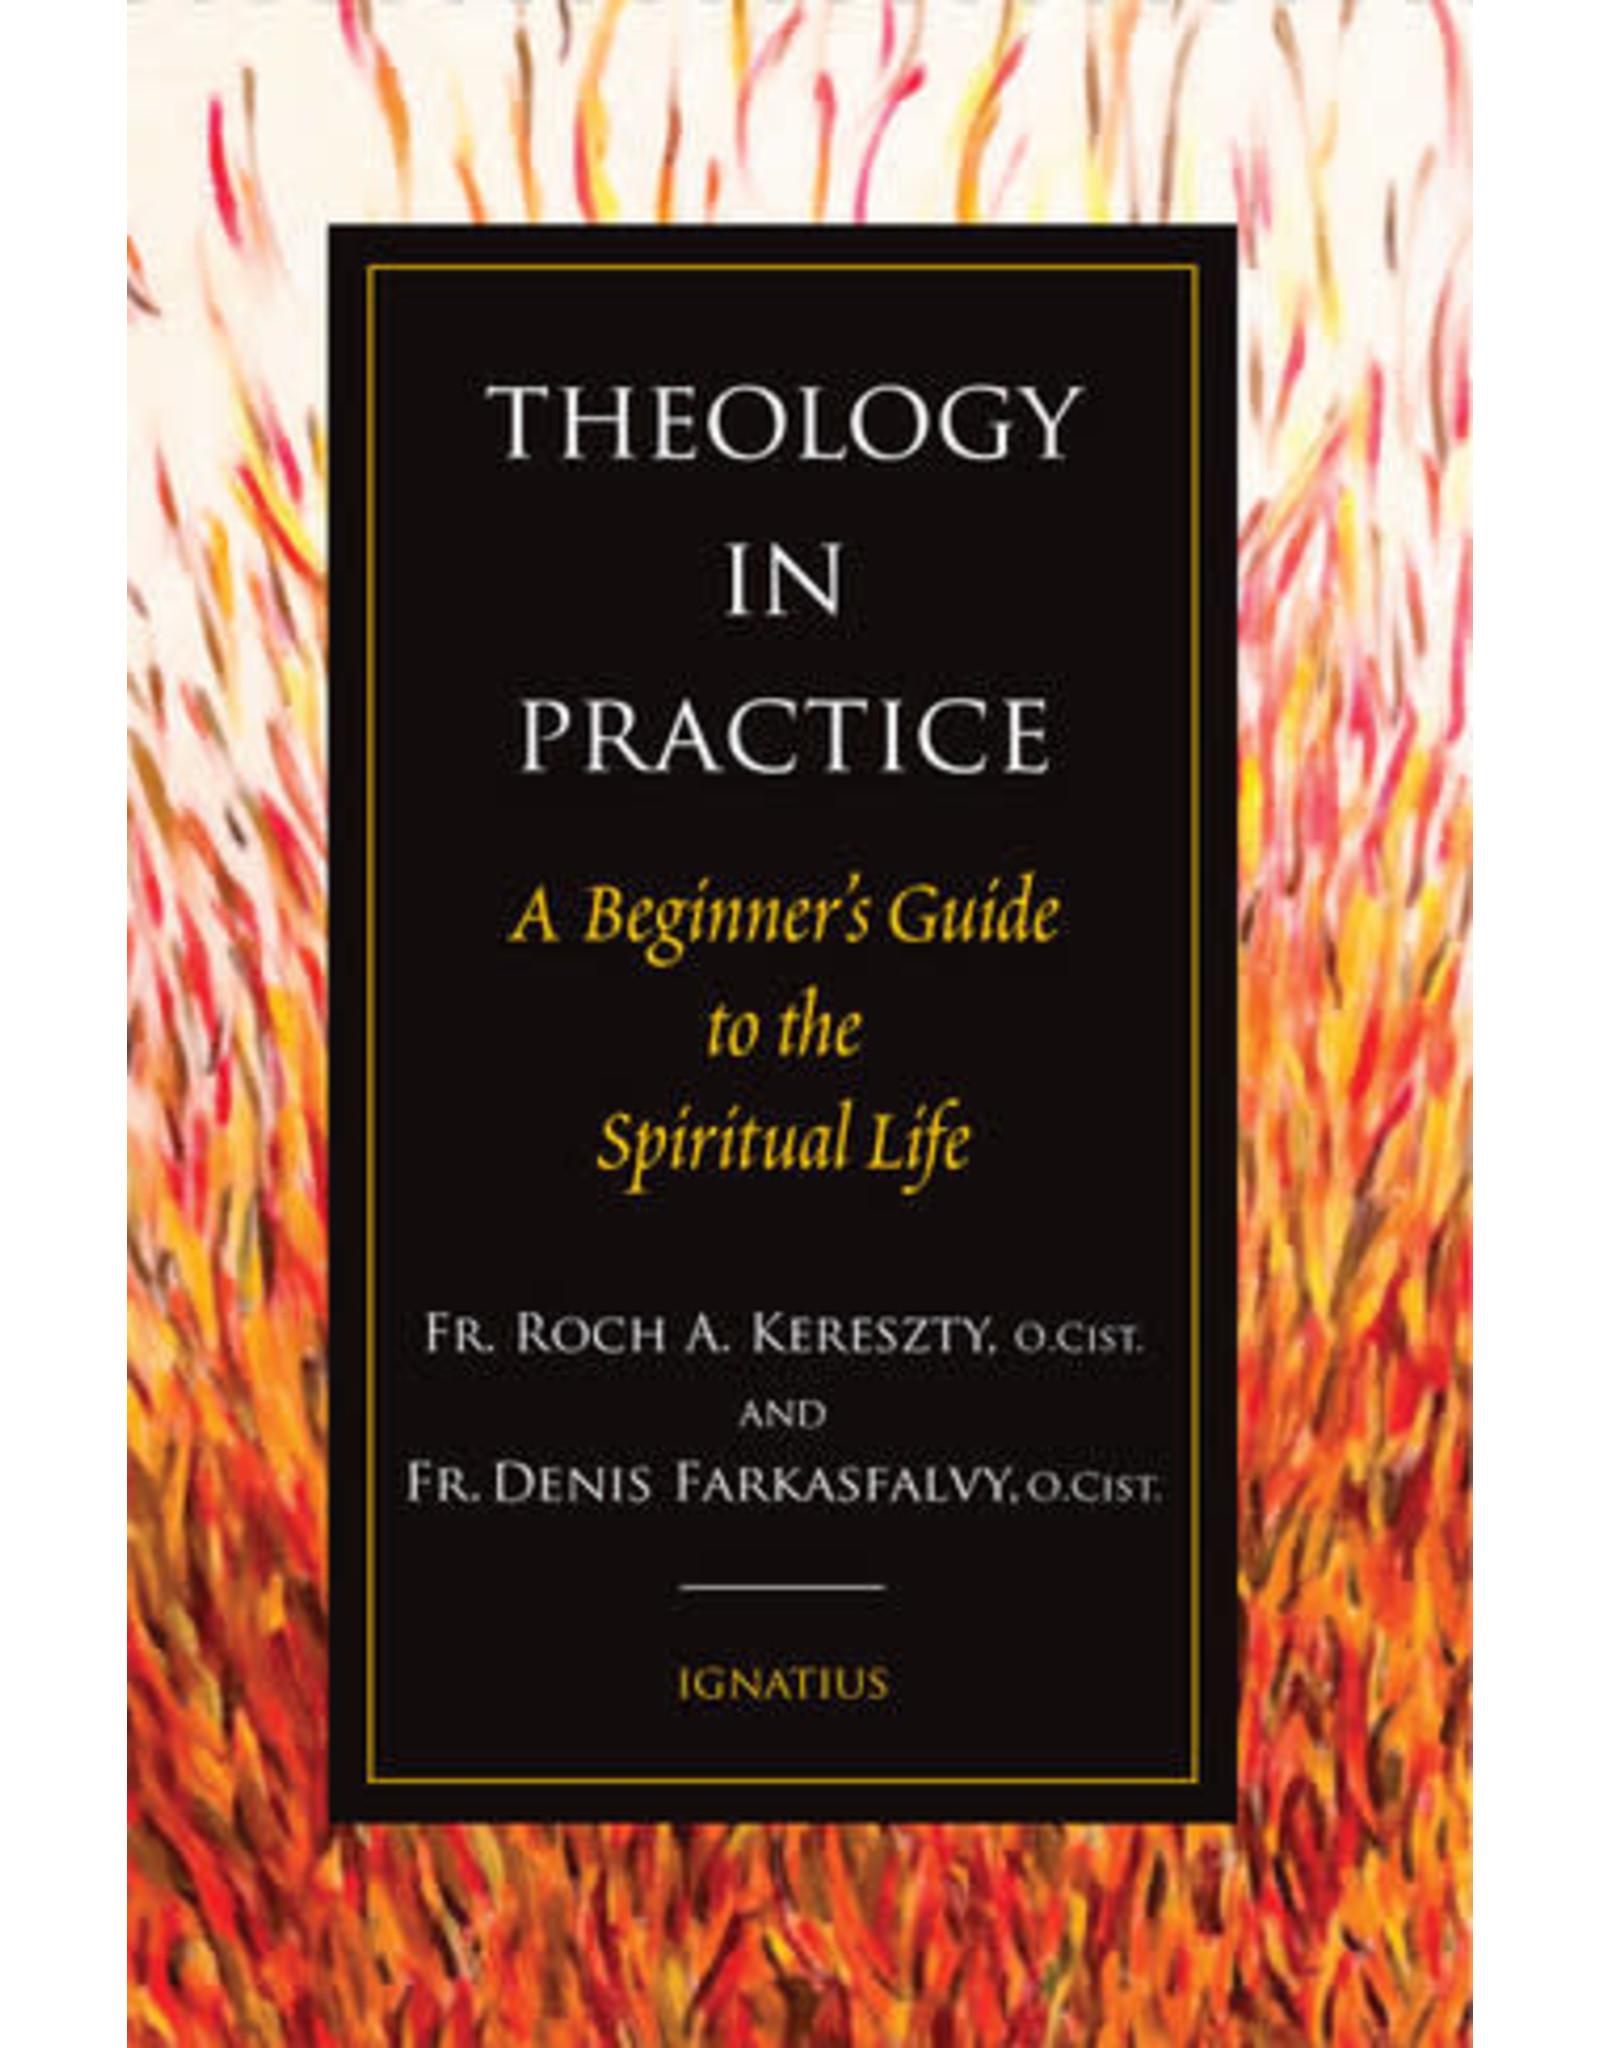 Ignatius Press Theology in Practice A Beginner's Guide to the Spiritual Life